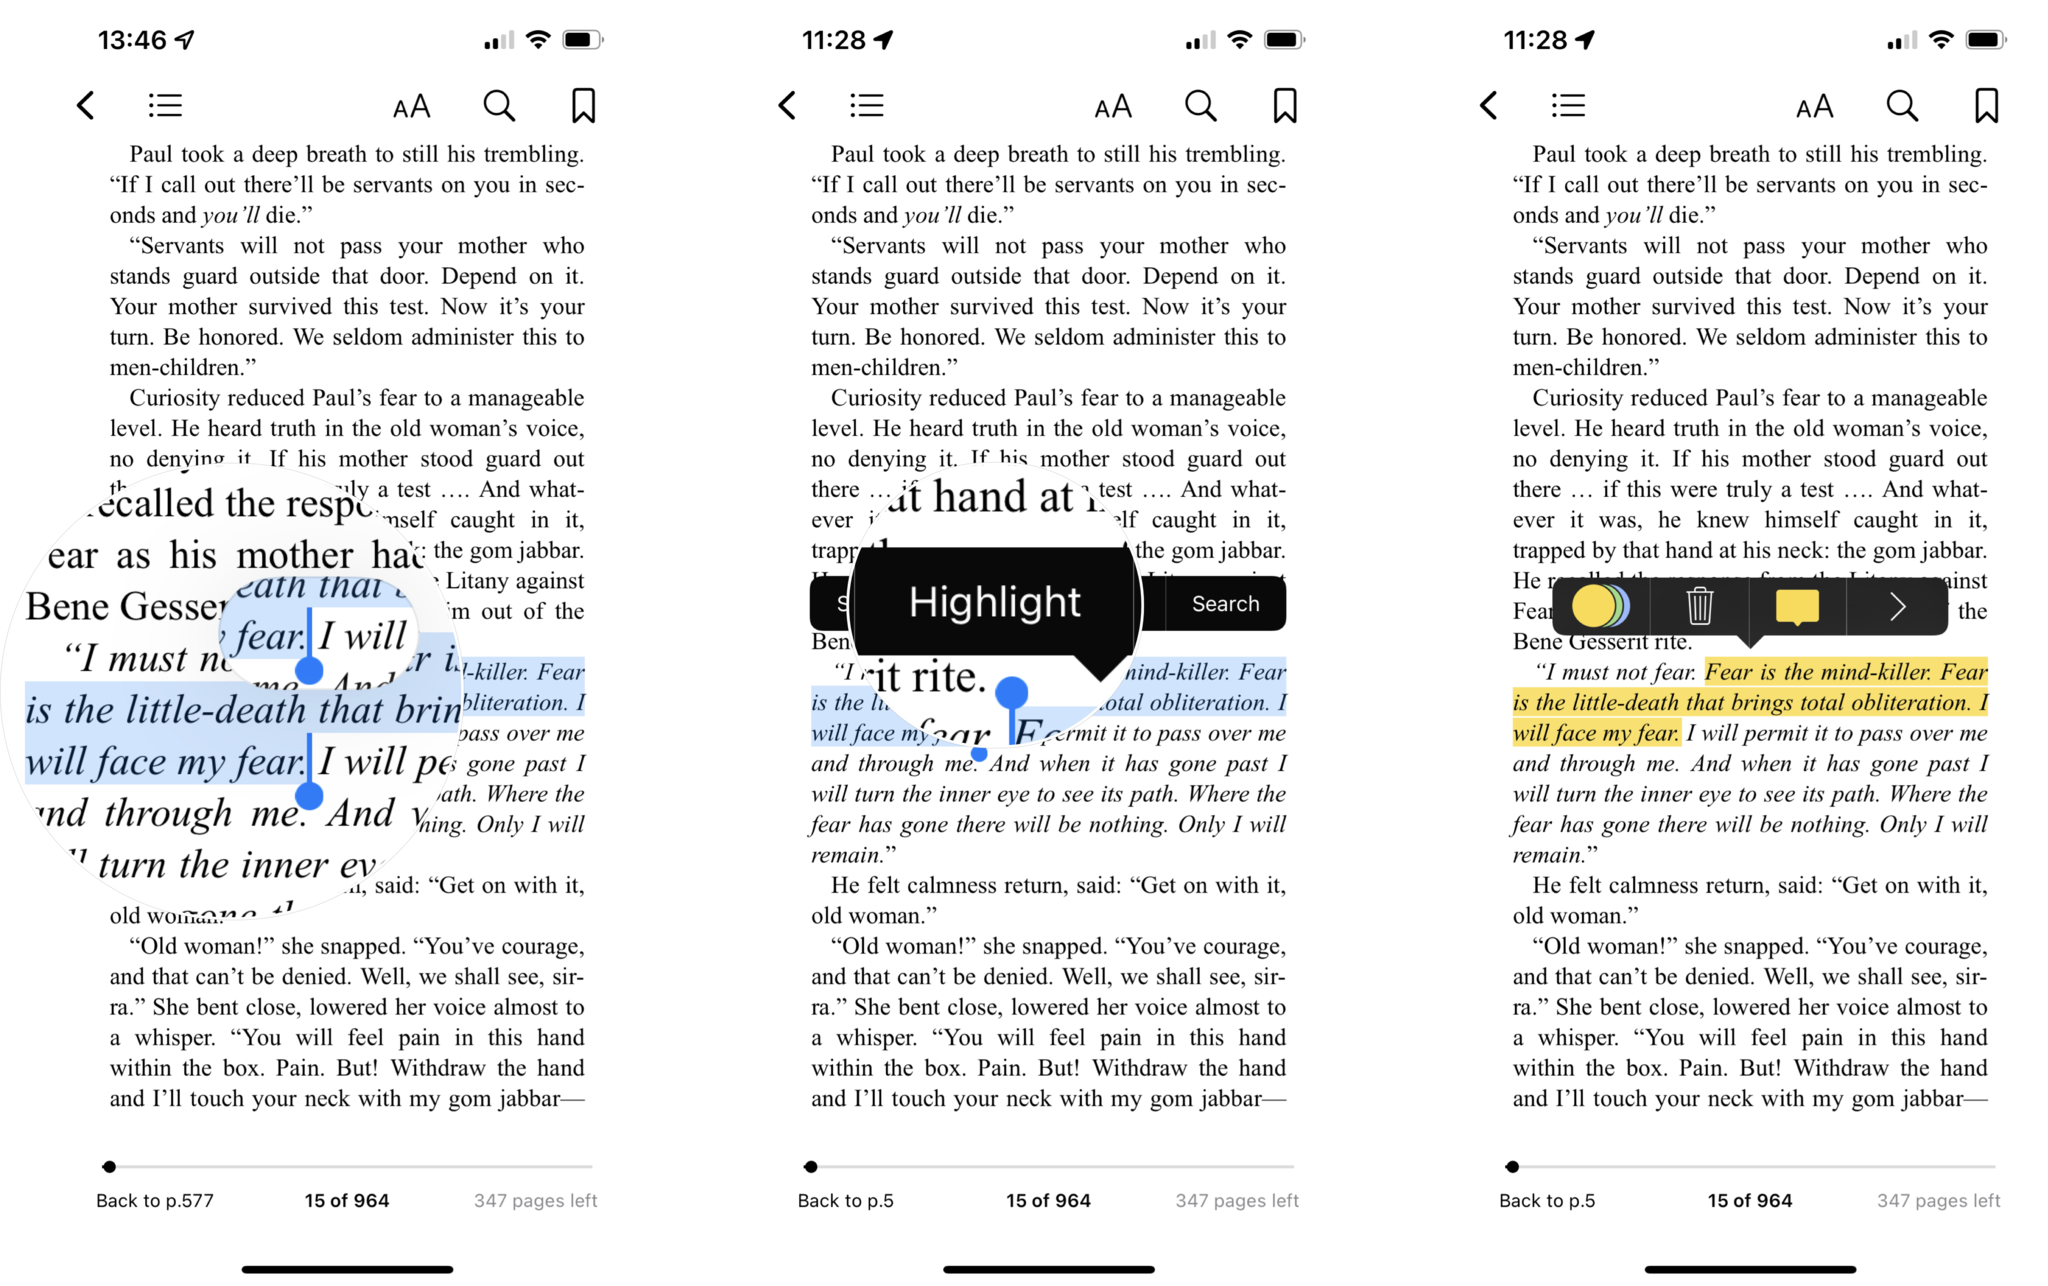 How to highlight text in a book in Apple Books: Touch and hold the starting point of the text you want to highlight, then drag to the end of the text, tap Highlight